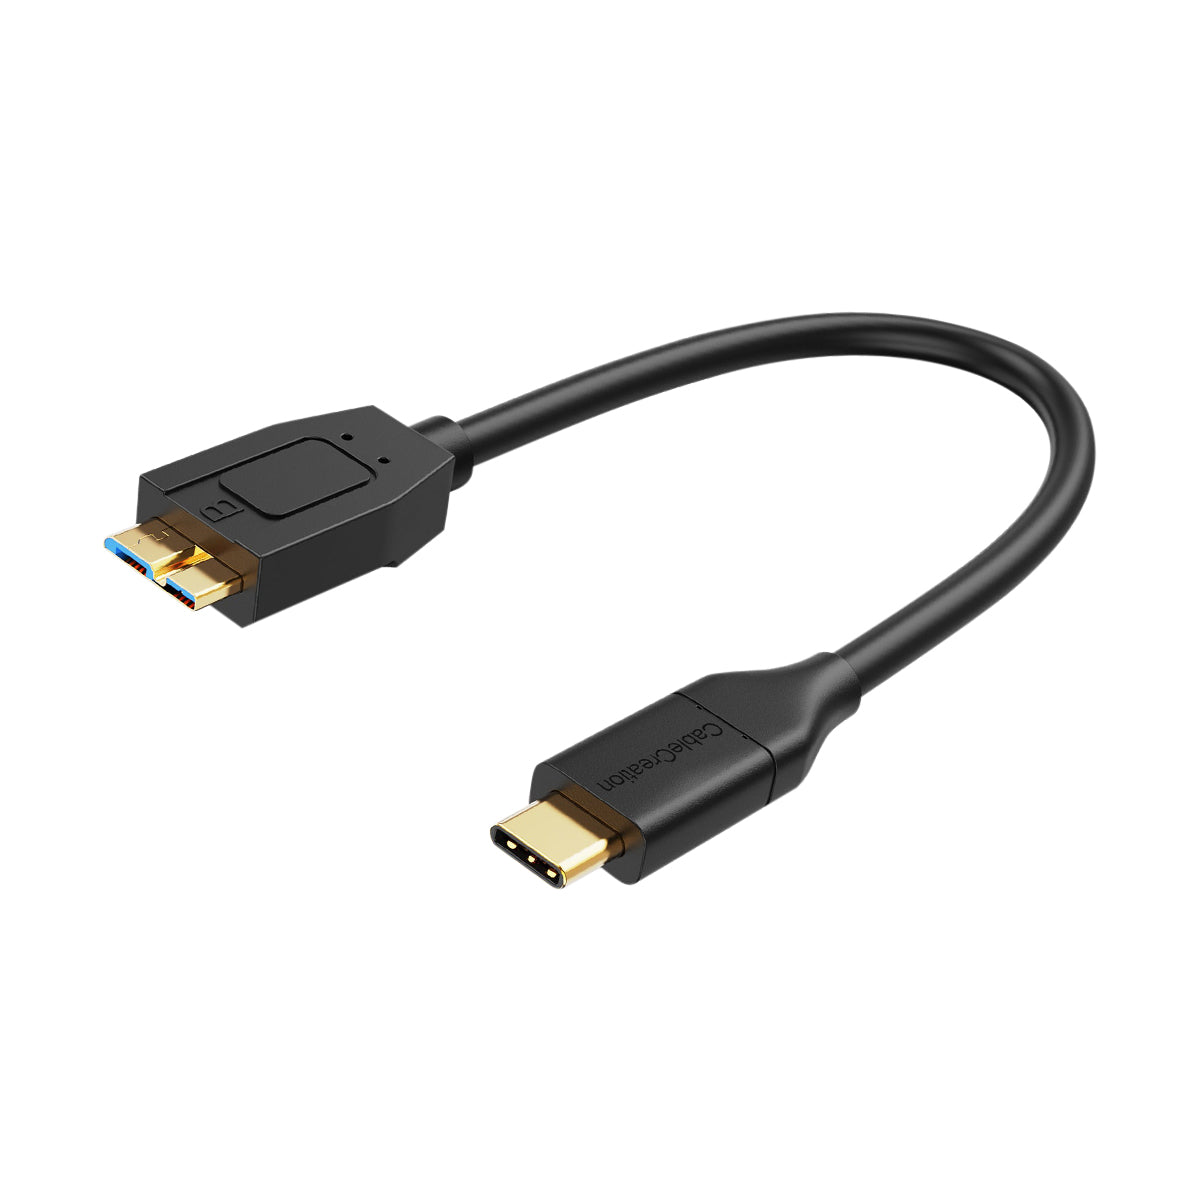 USB C to Micro B Hard Disk Cable